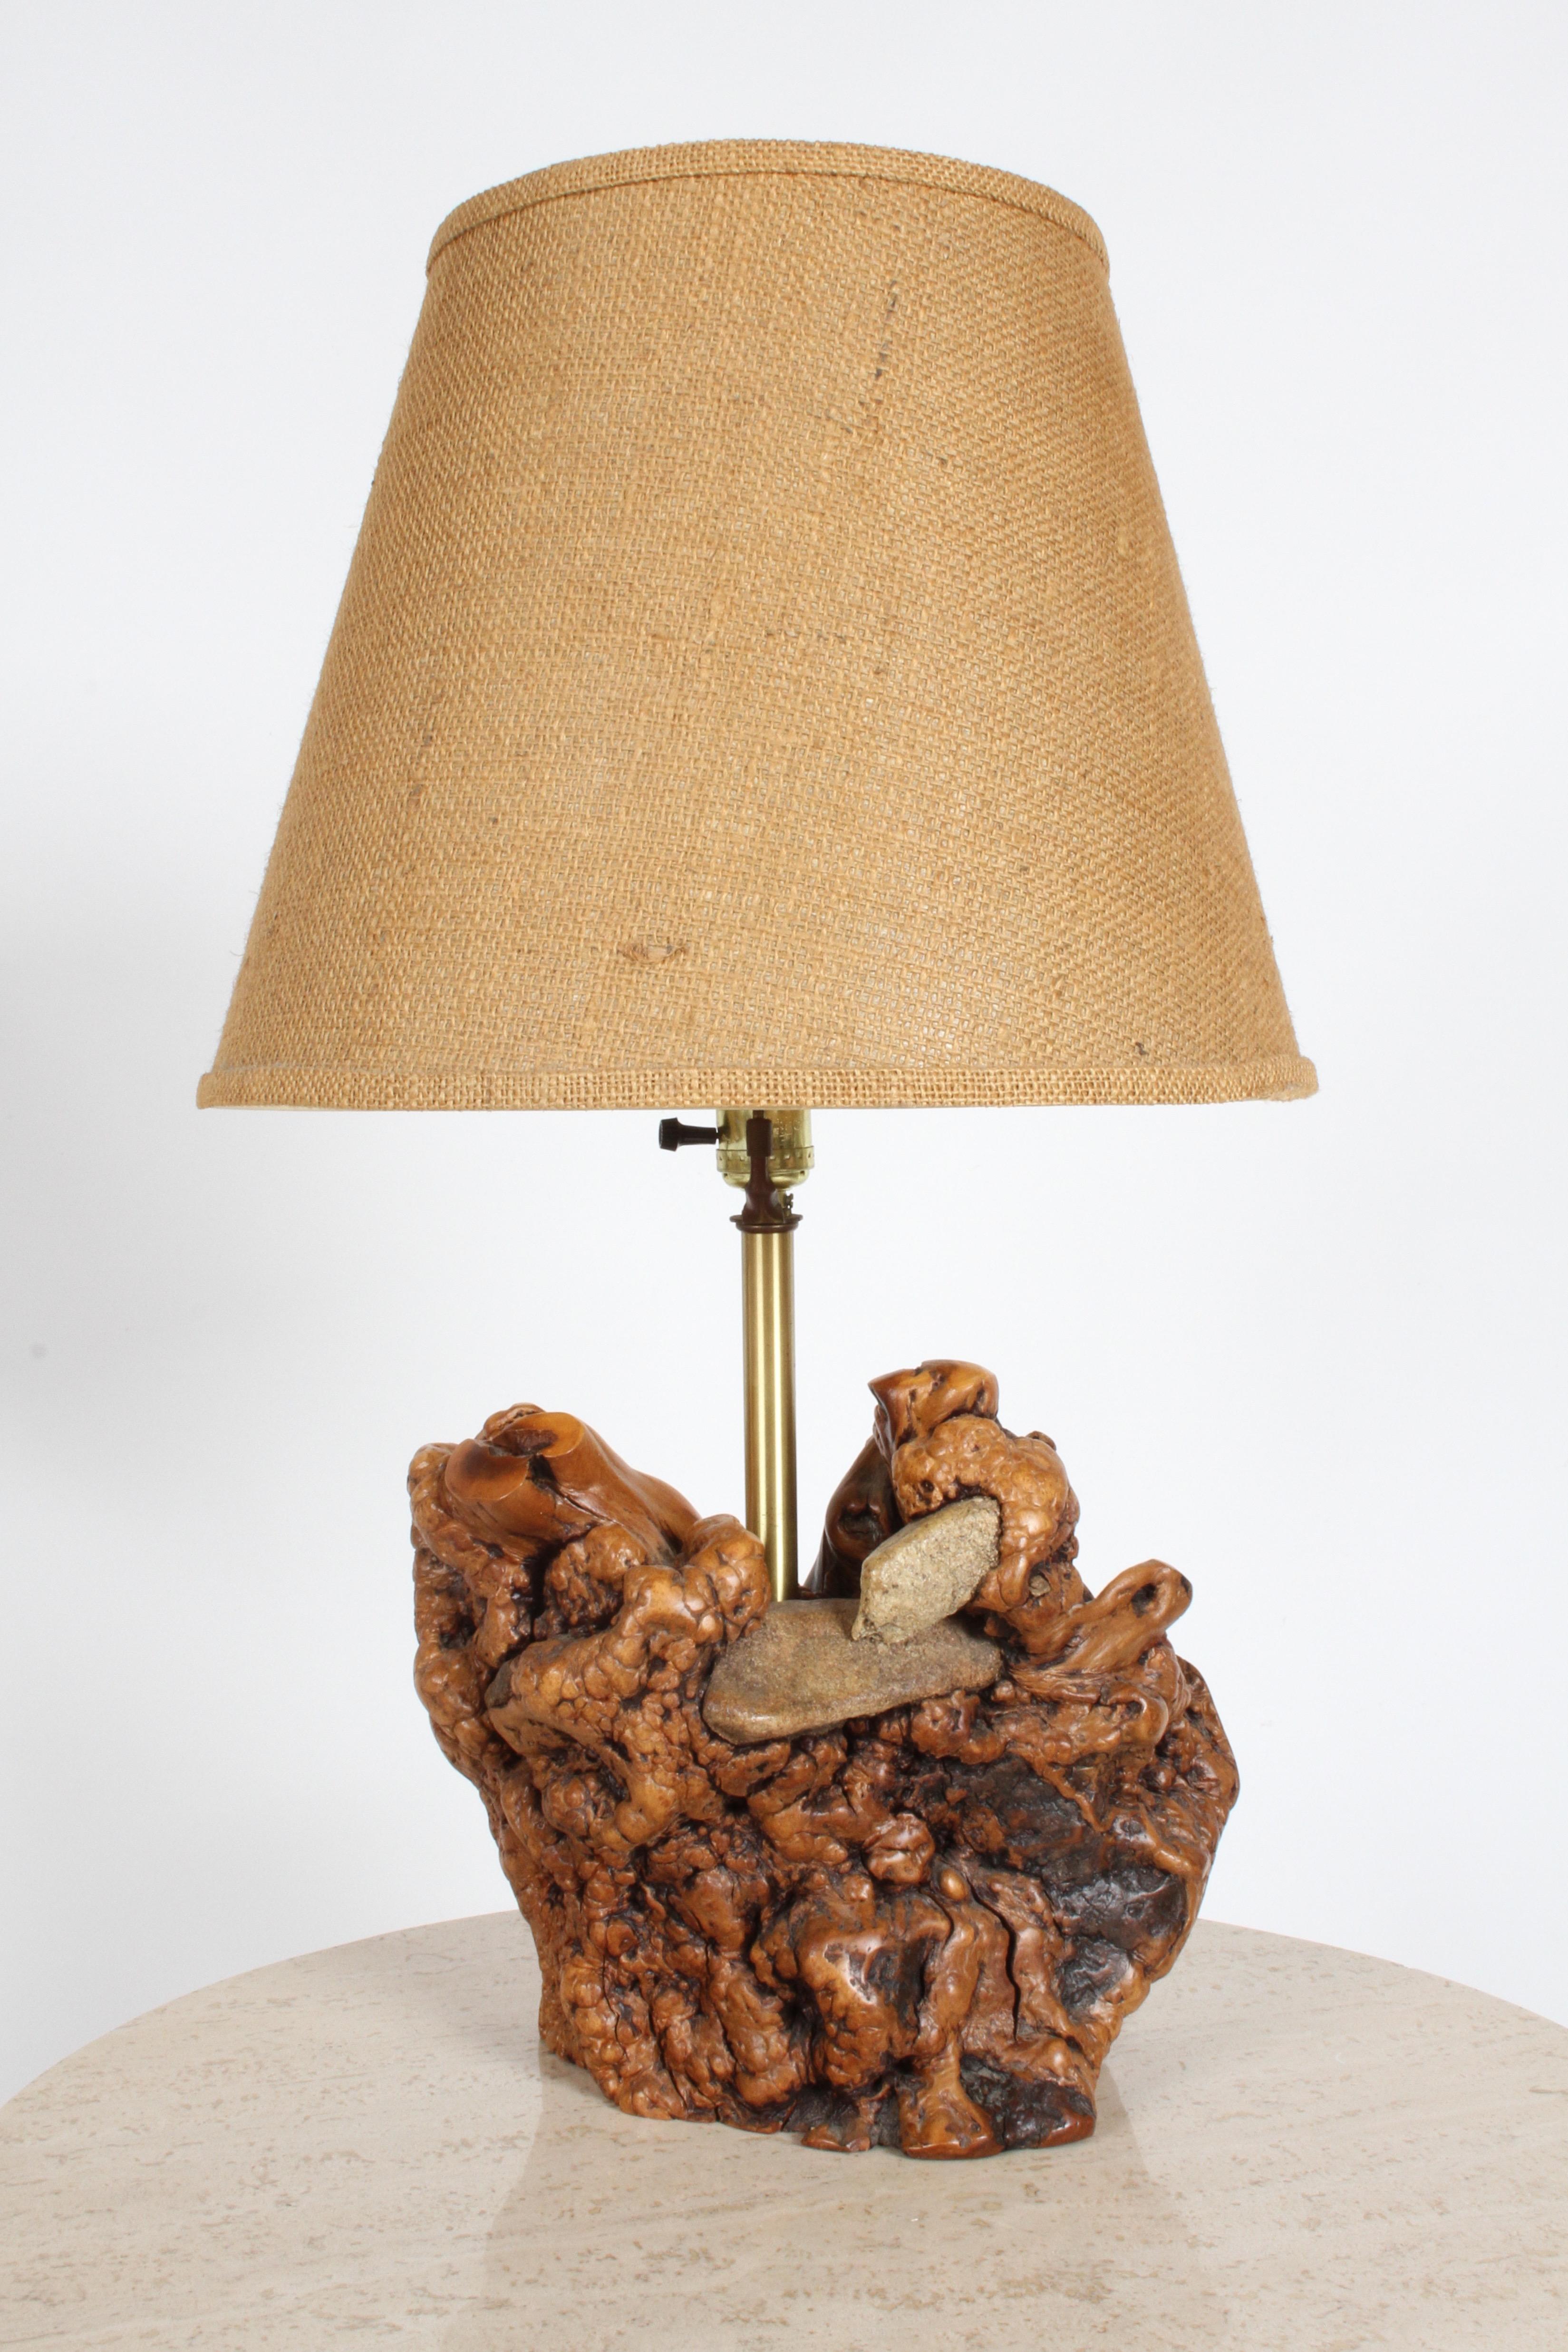 Nice vintage tree root or driftwood lamp sculpted by nature with embedded rocks that tree grew around. This comes from the estate of Morton D. May of May Department stores, major art collector of Pre-Columbian Art, Oceanic Art, Max Beckmann etc,